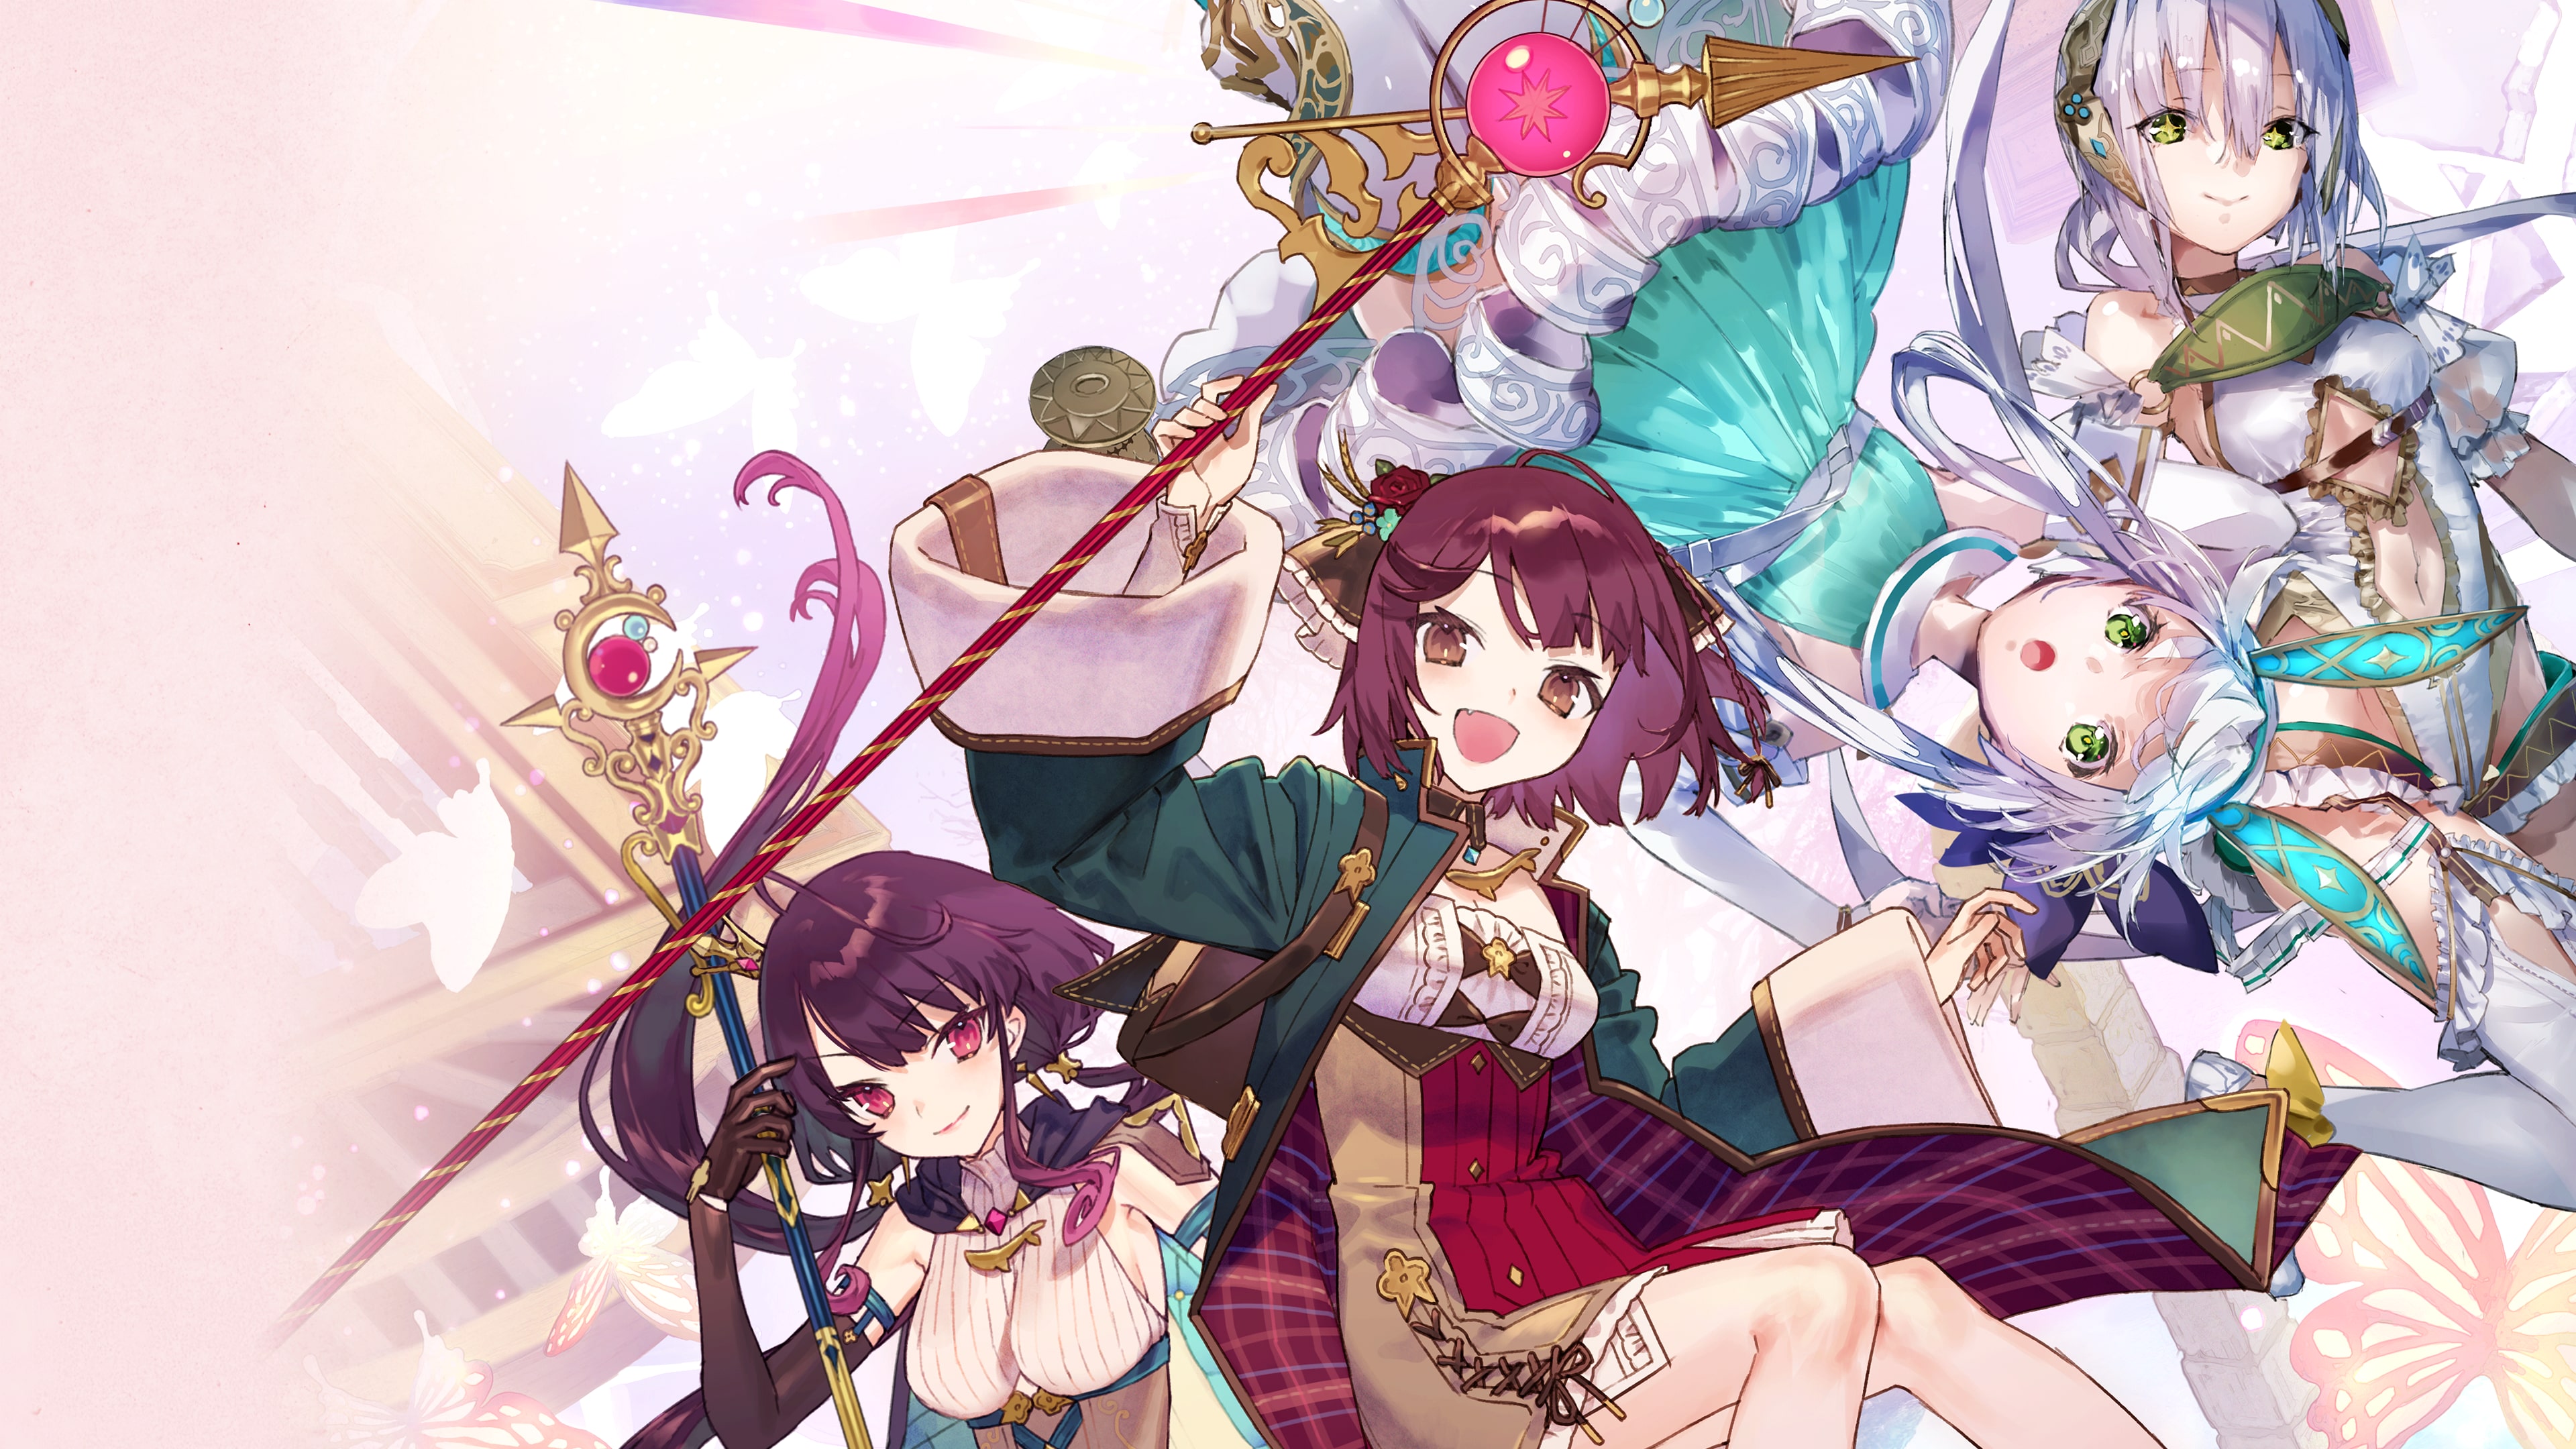 Atelier Sophie 2: The Alchemist of the Mysterious Dream Ultimate Edition (Simplified Chinese, Korean, Traditional Chinese)